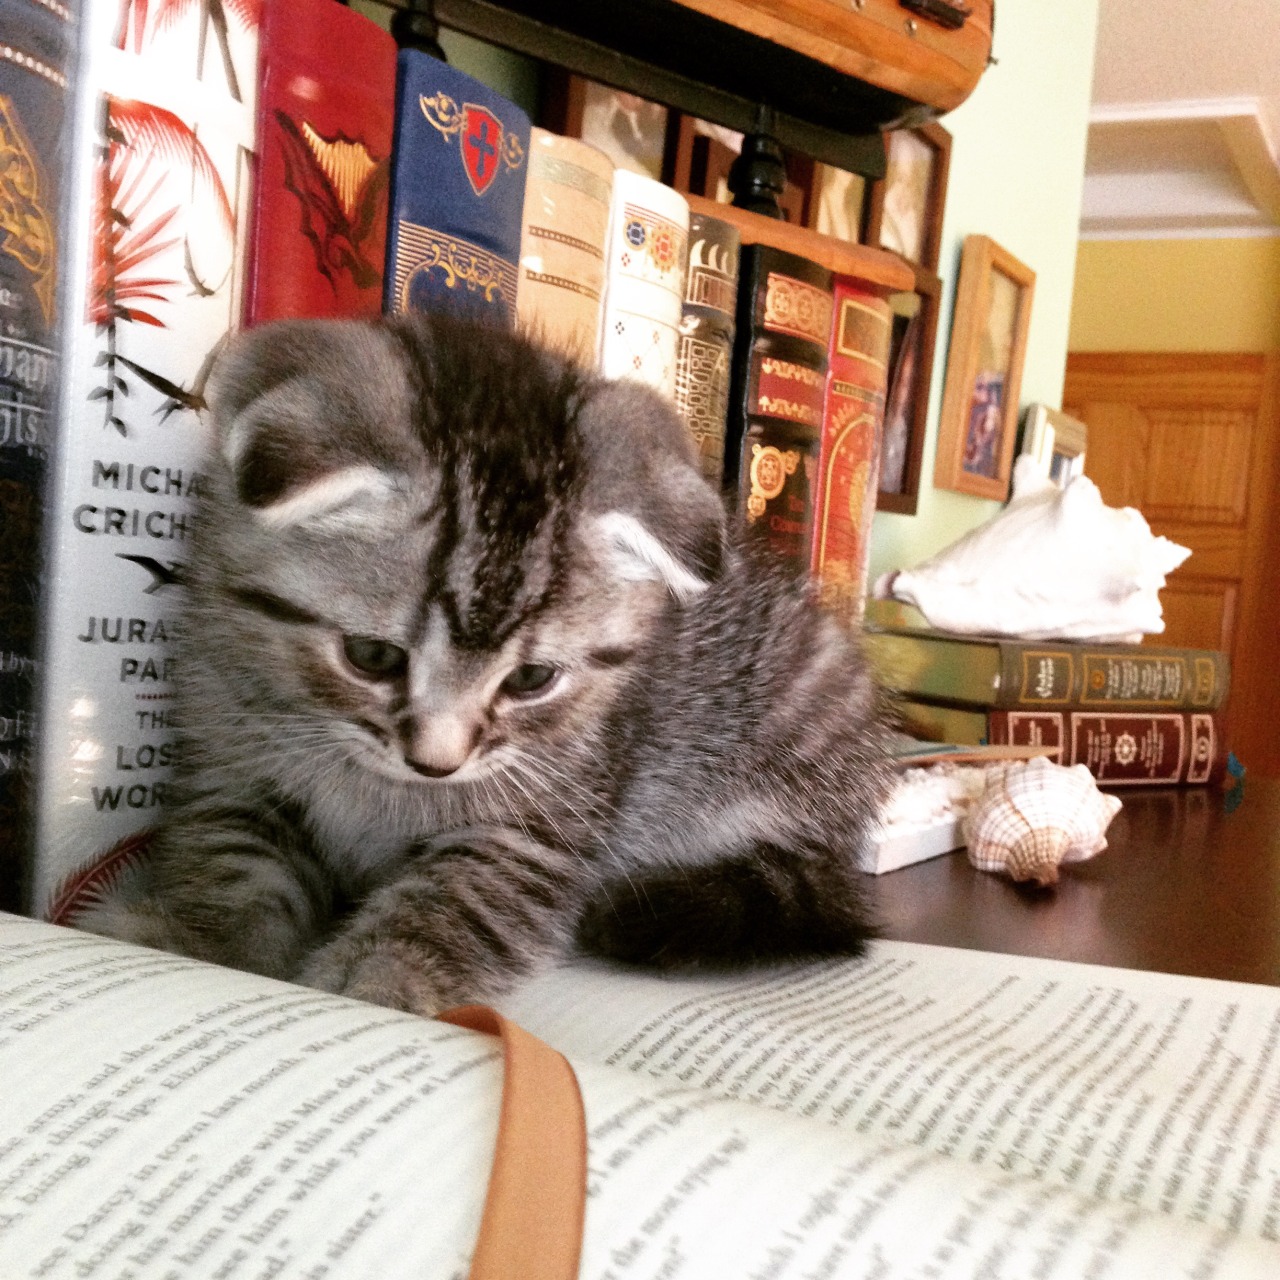 bookphile:  Me: Mom, send me pictures of kittens with the books, so I can put them